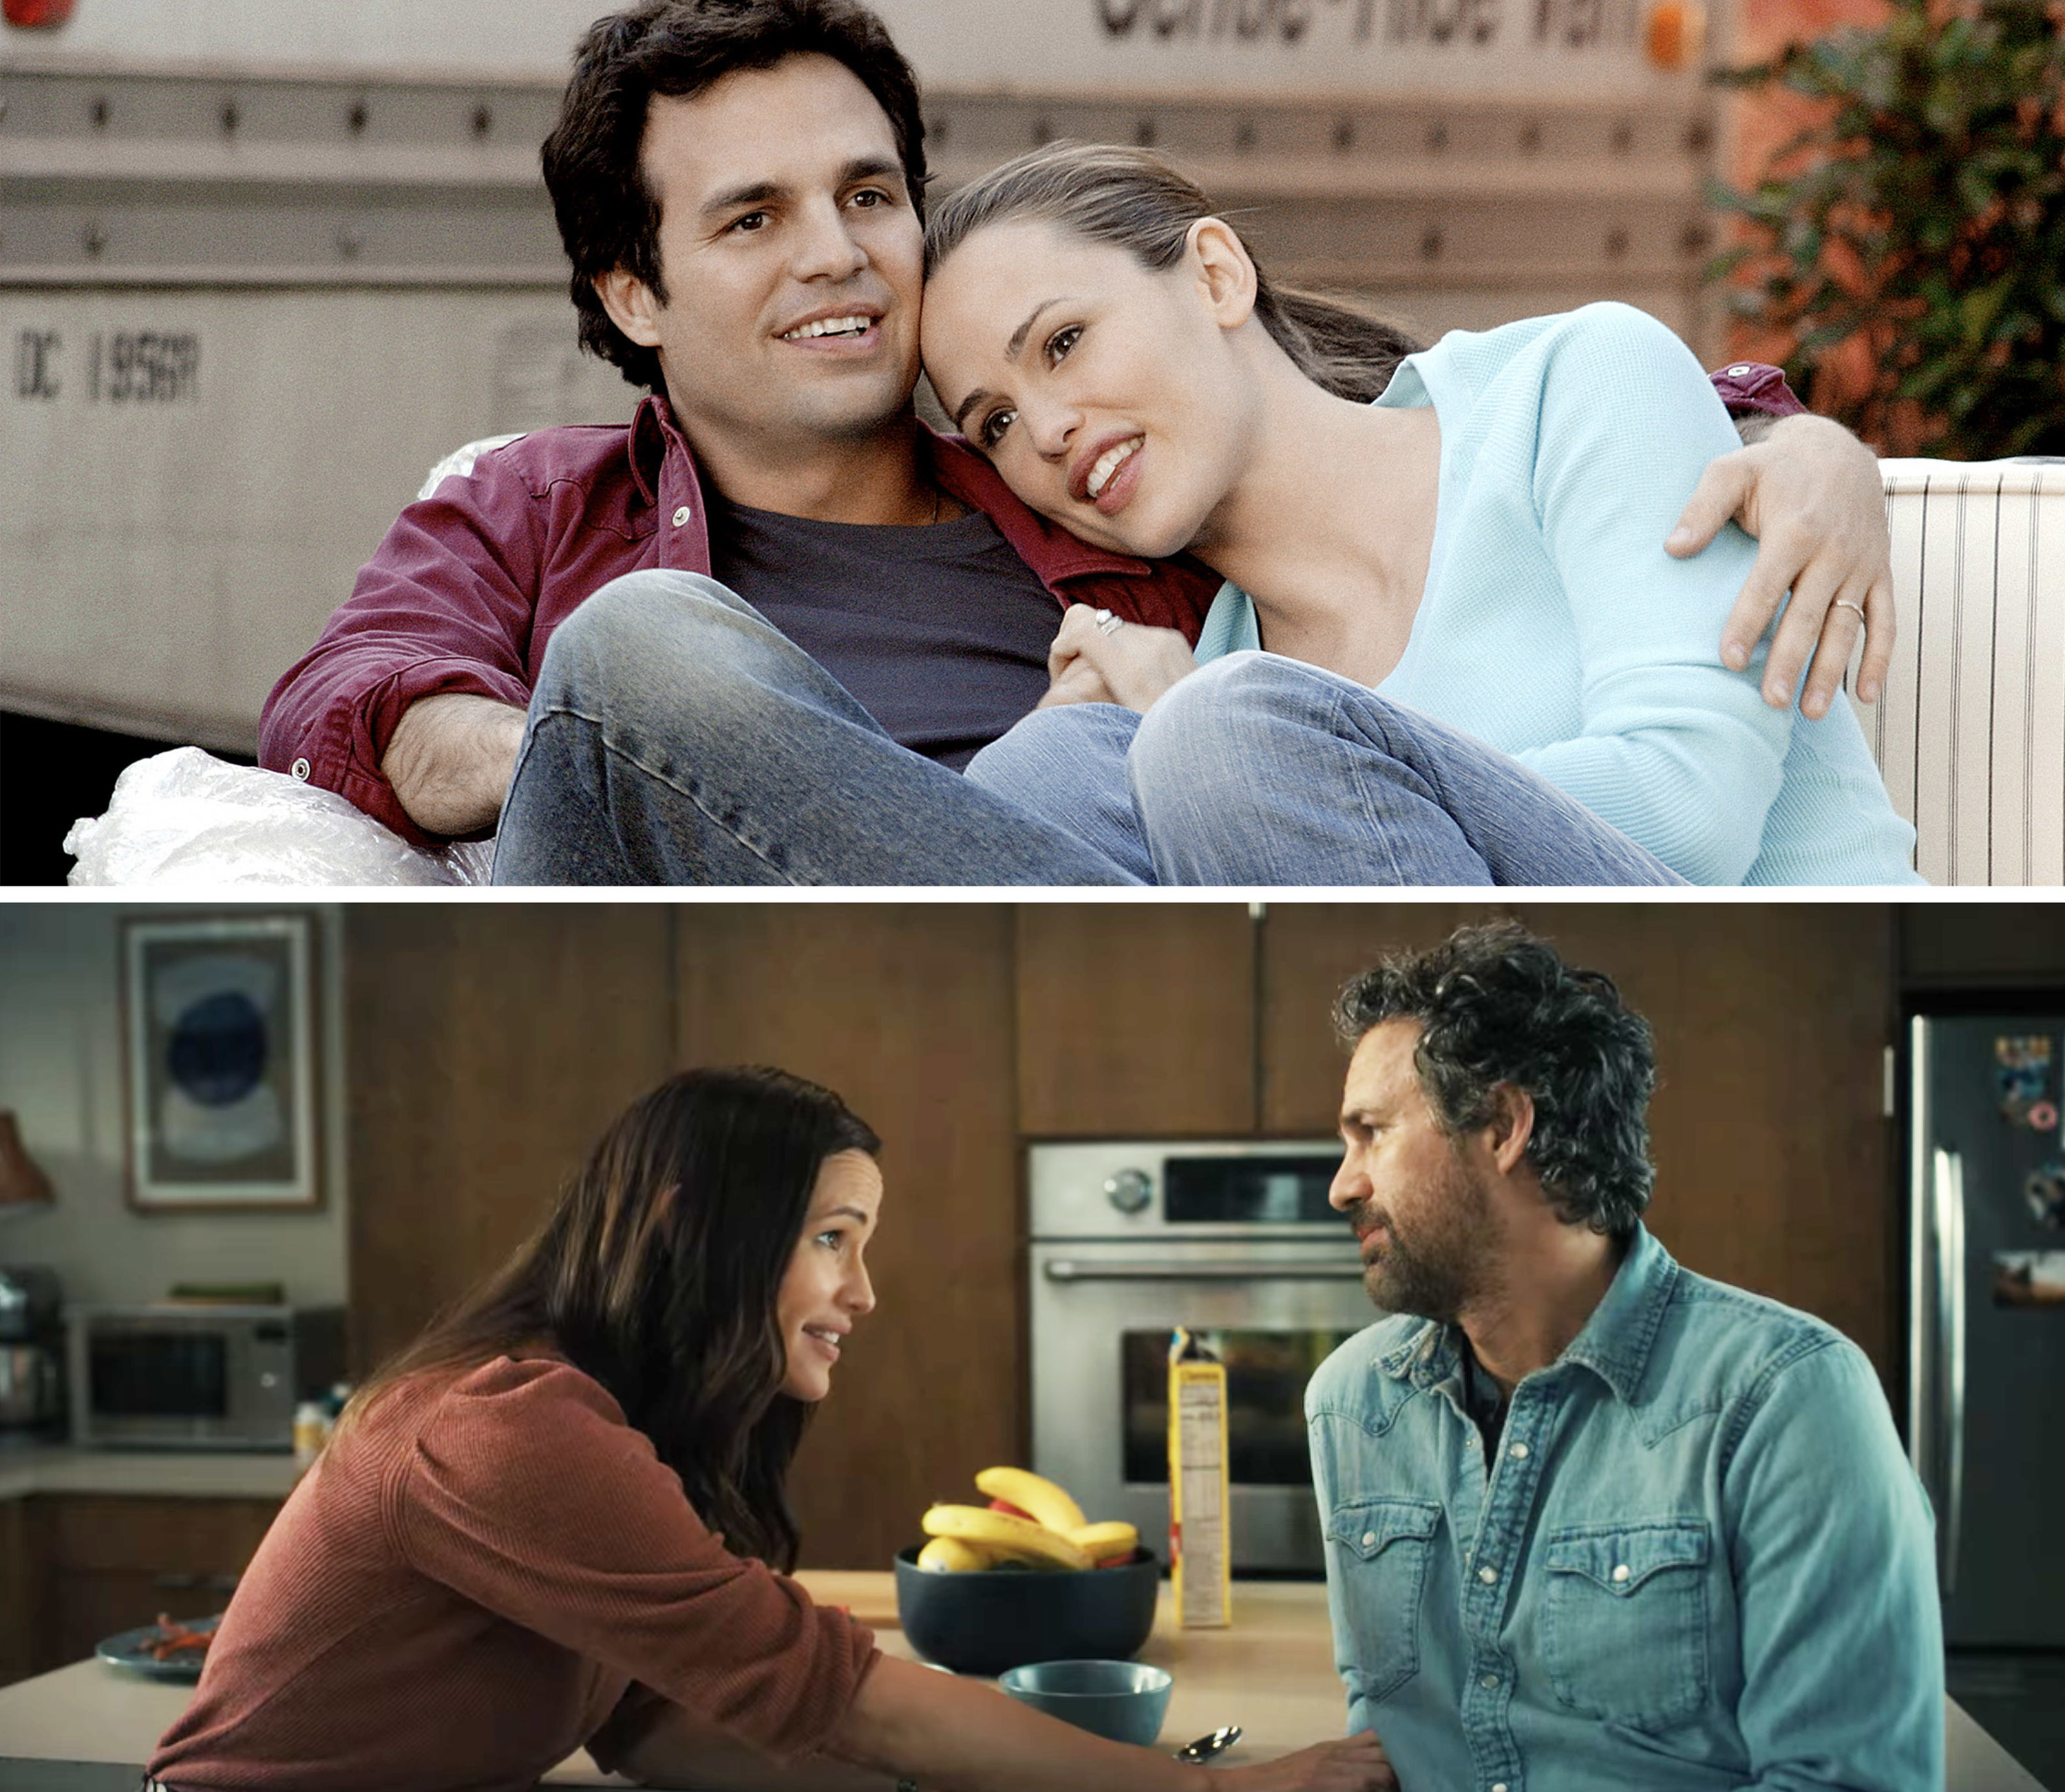 Mark and Jennifer in &quot;13 Going on 30&quot; vs &quot;The Adam Project&quot;